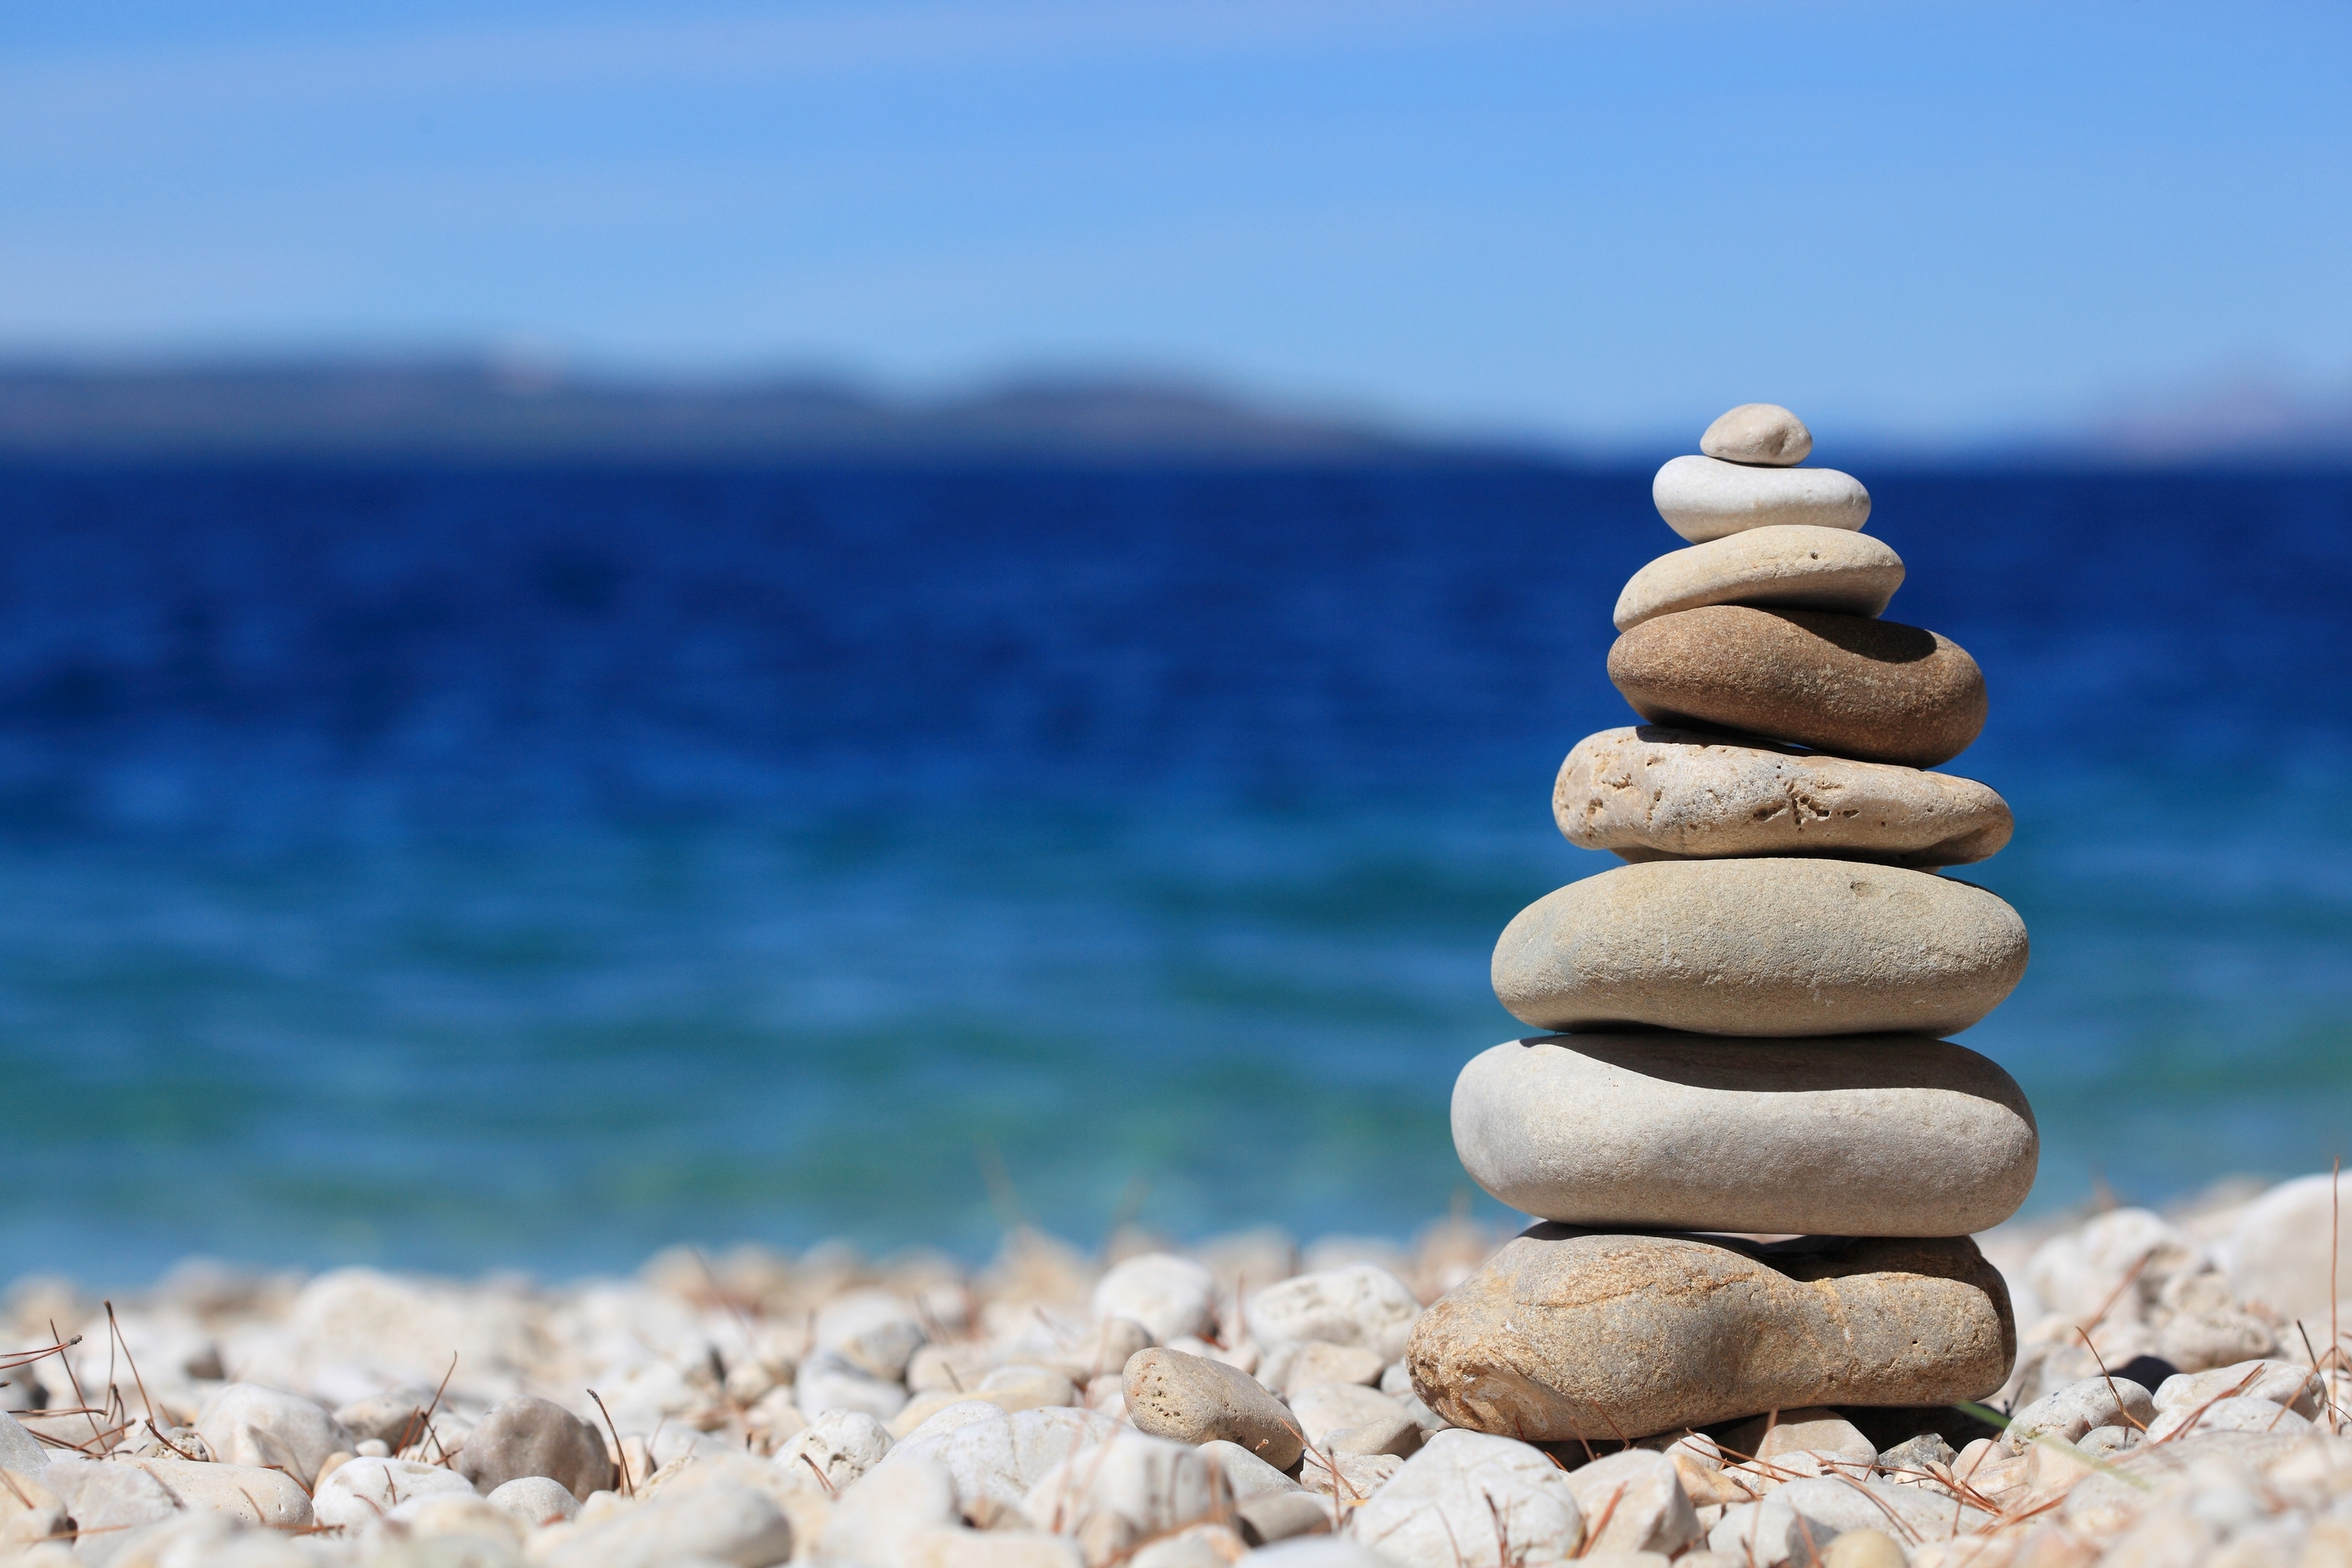 Balancing Stones Wallpapers High Quality | Download Free